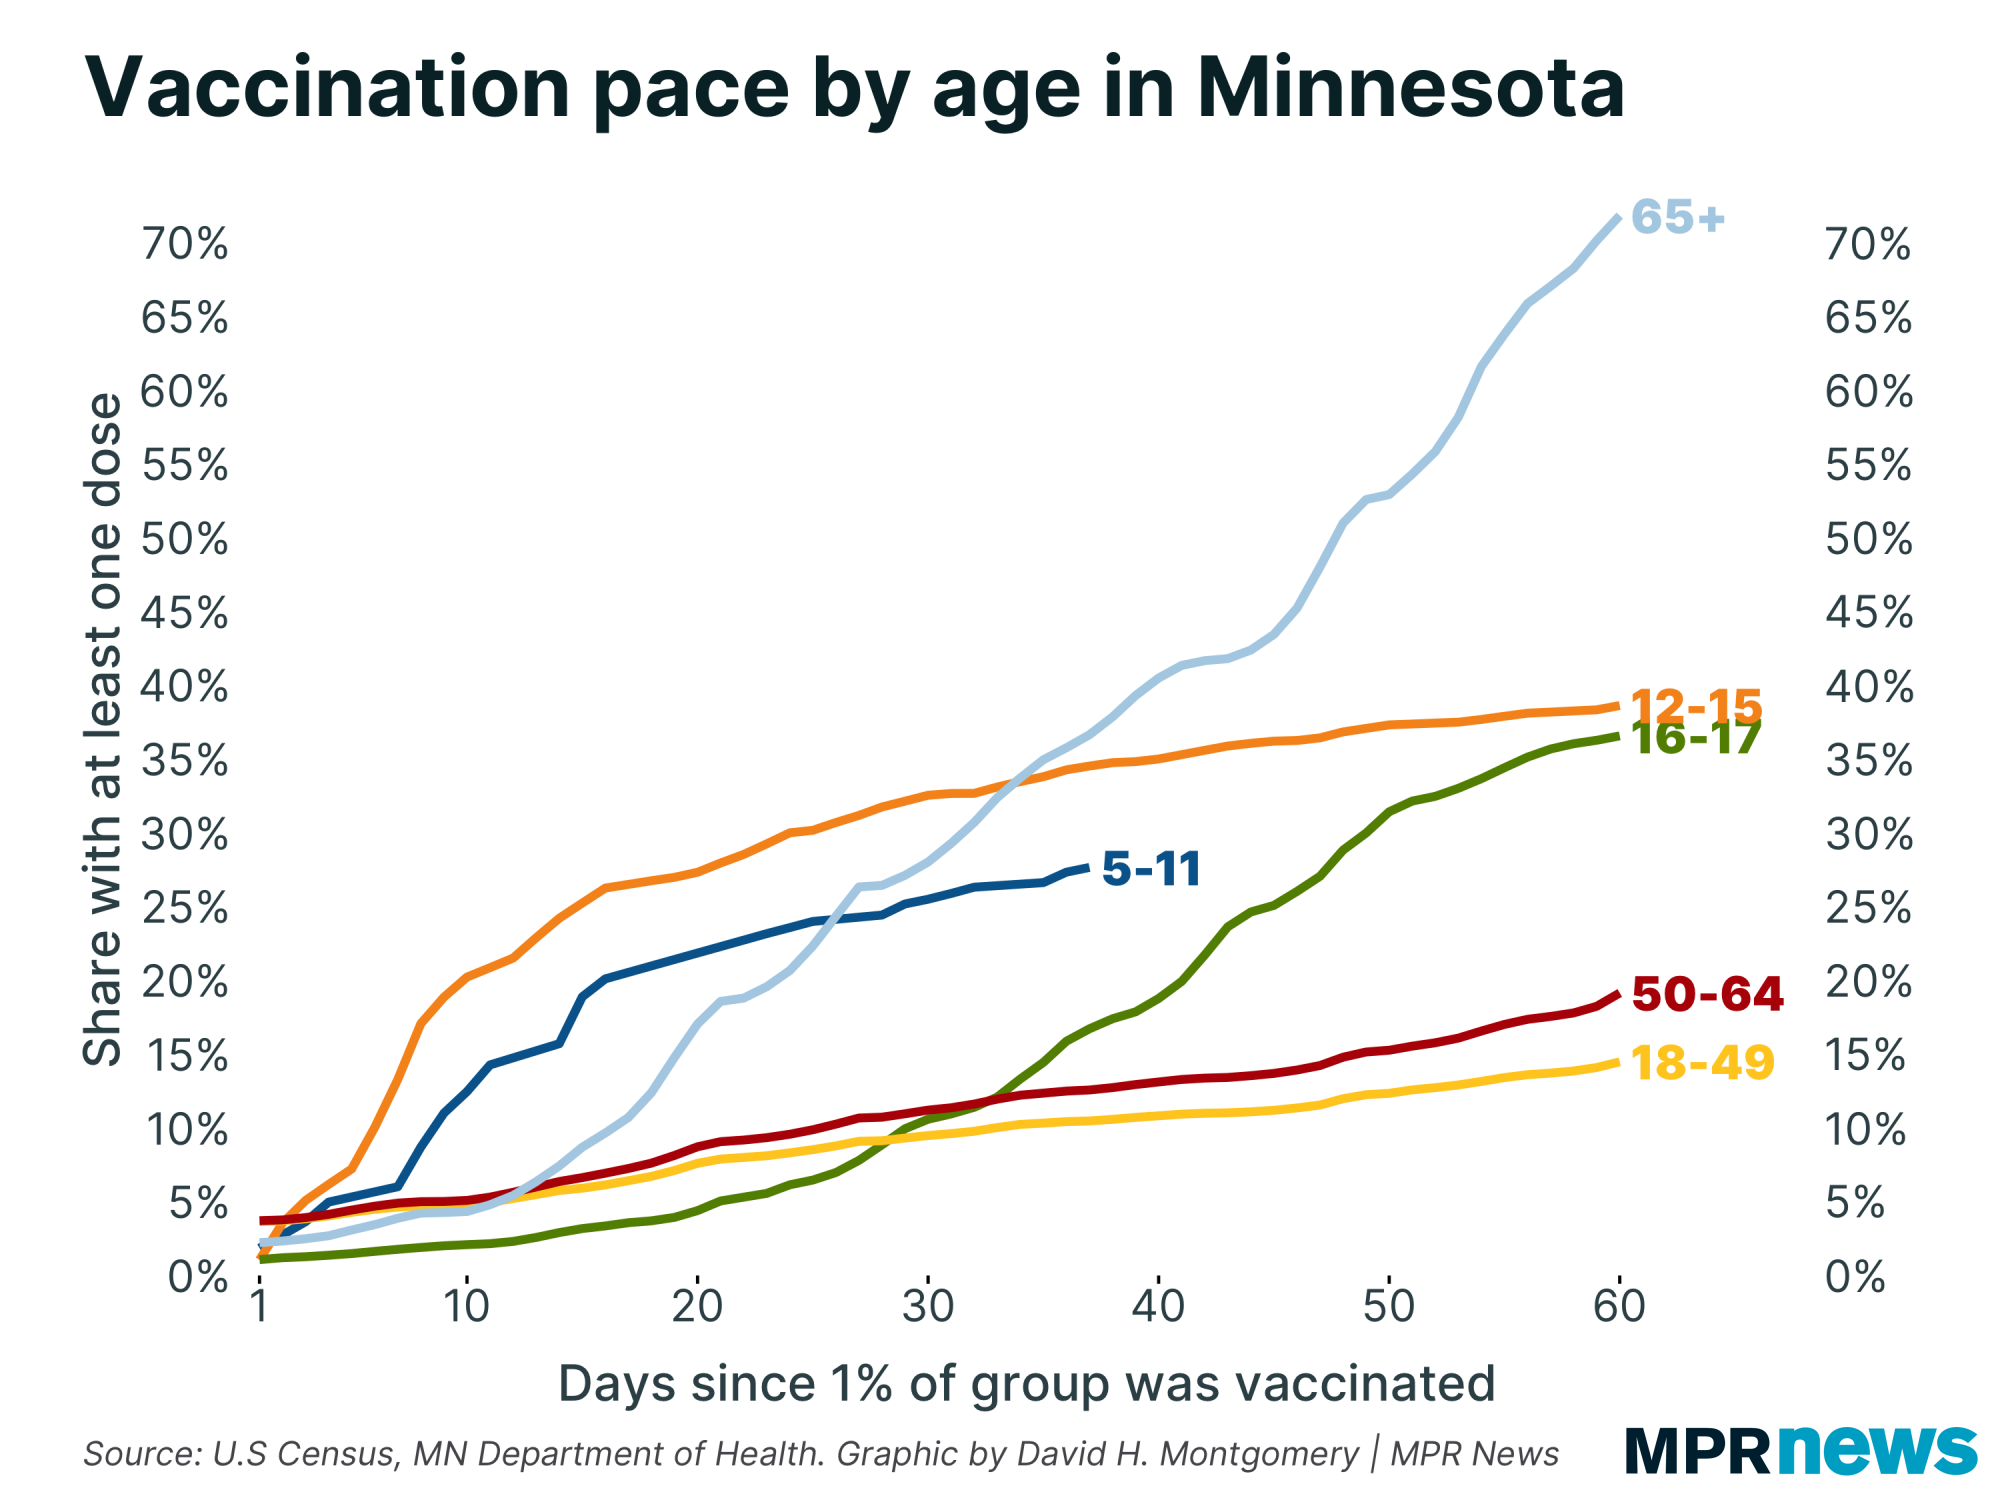 Graph of COVID-19 vaccination pace by age